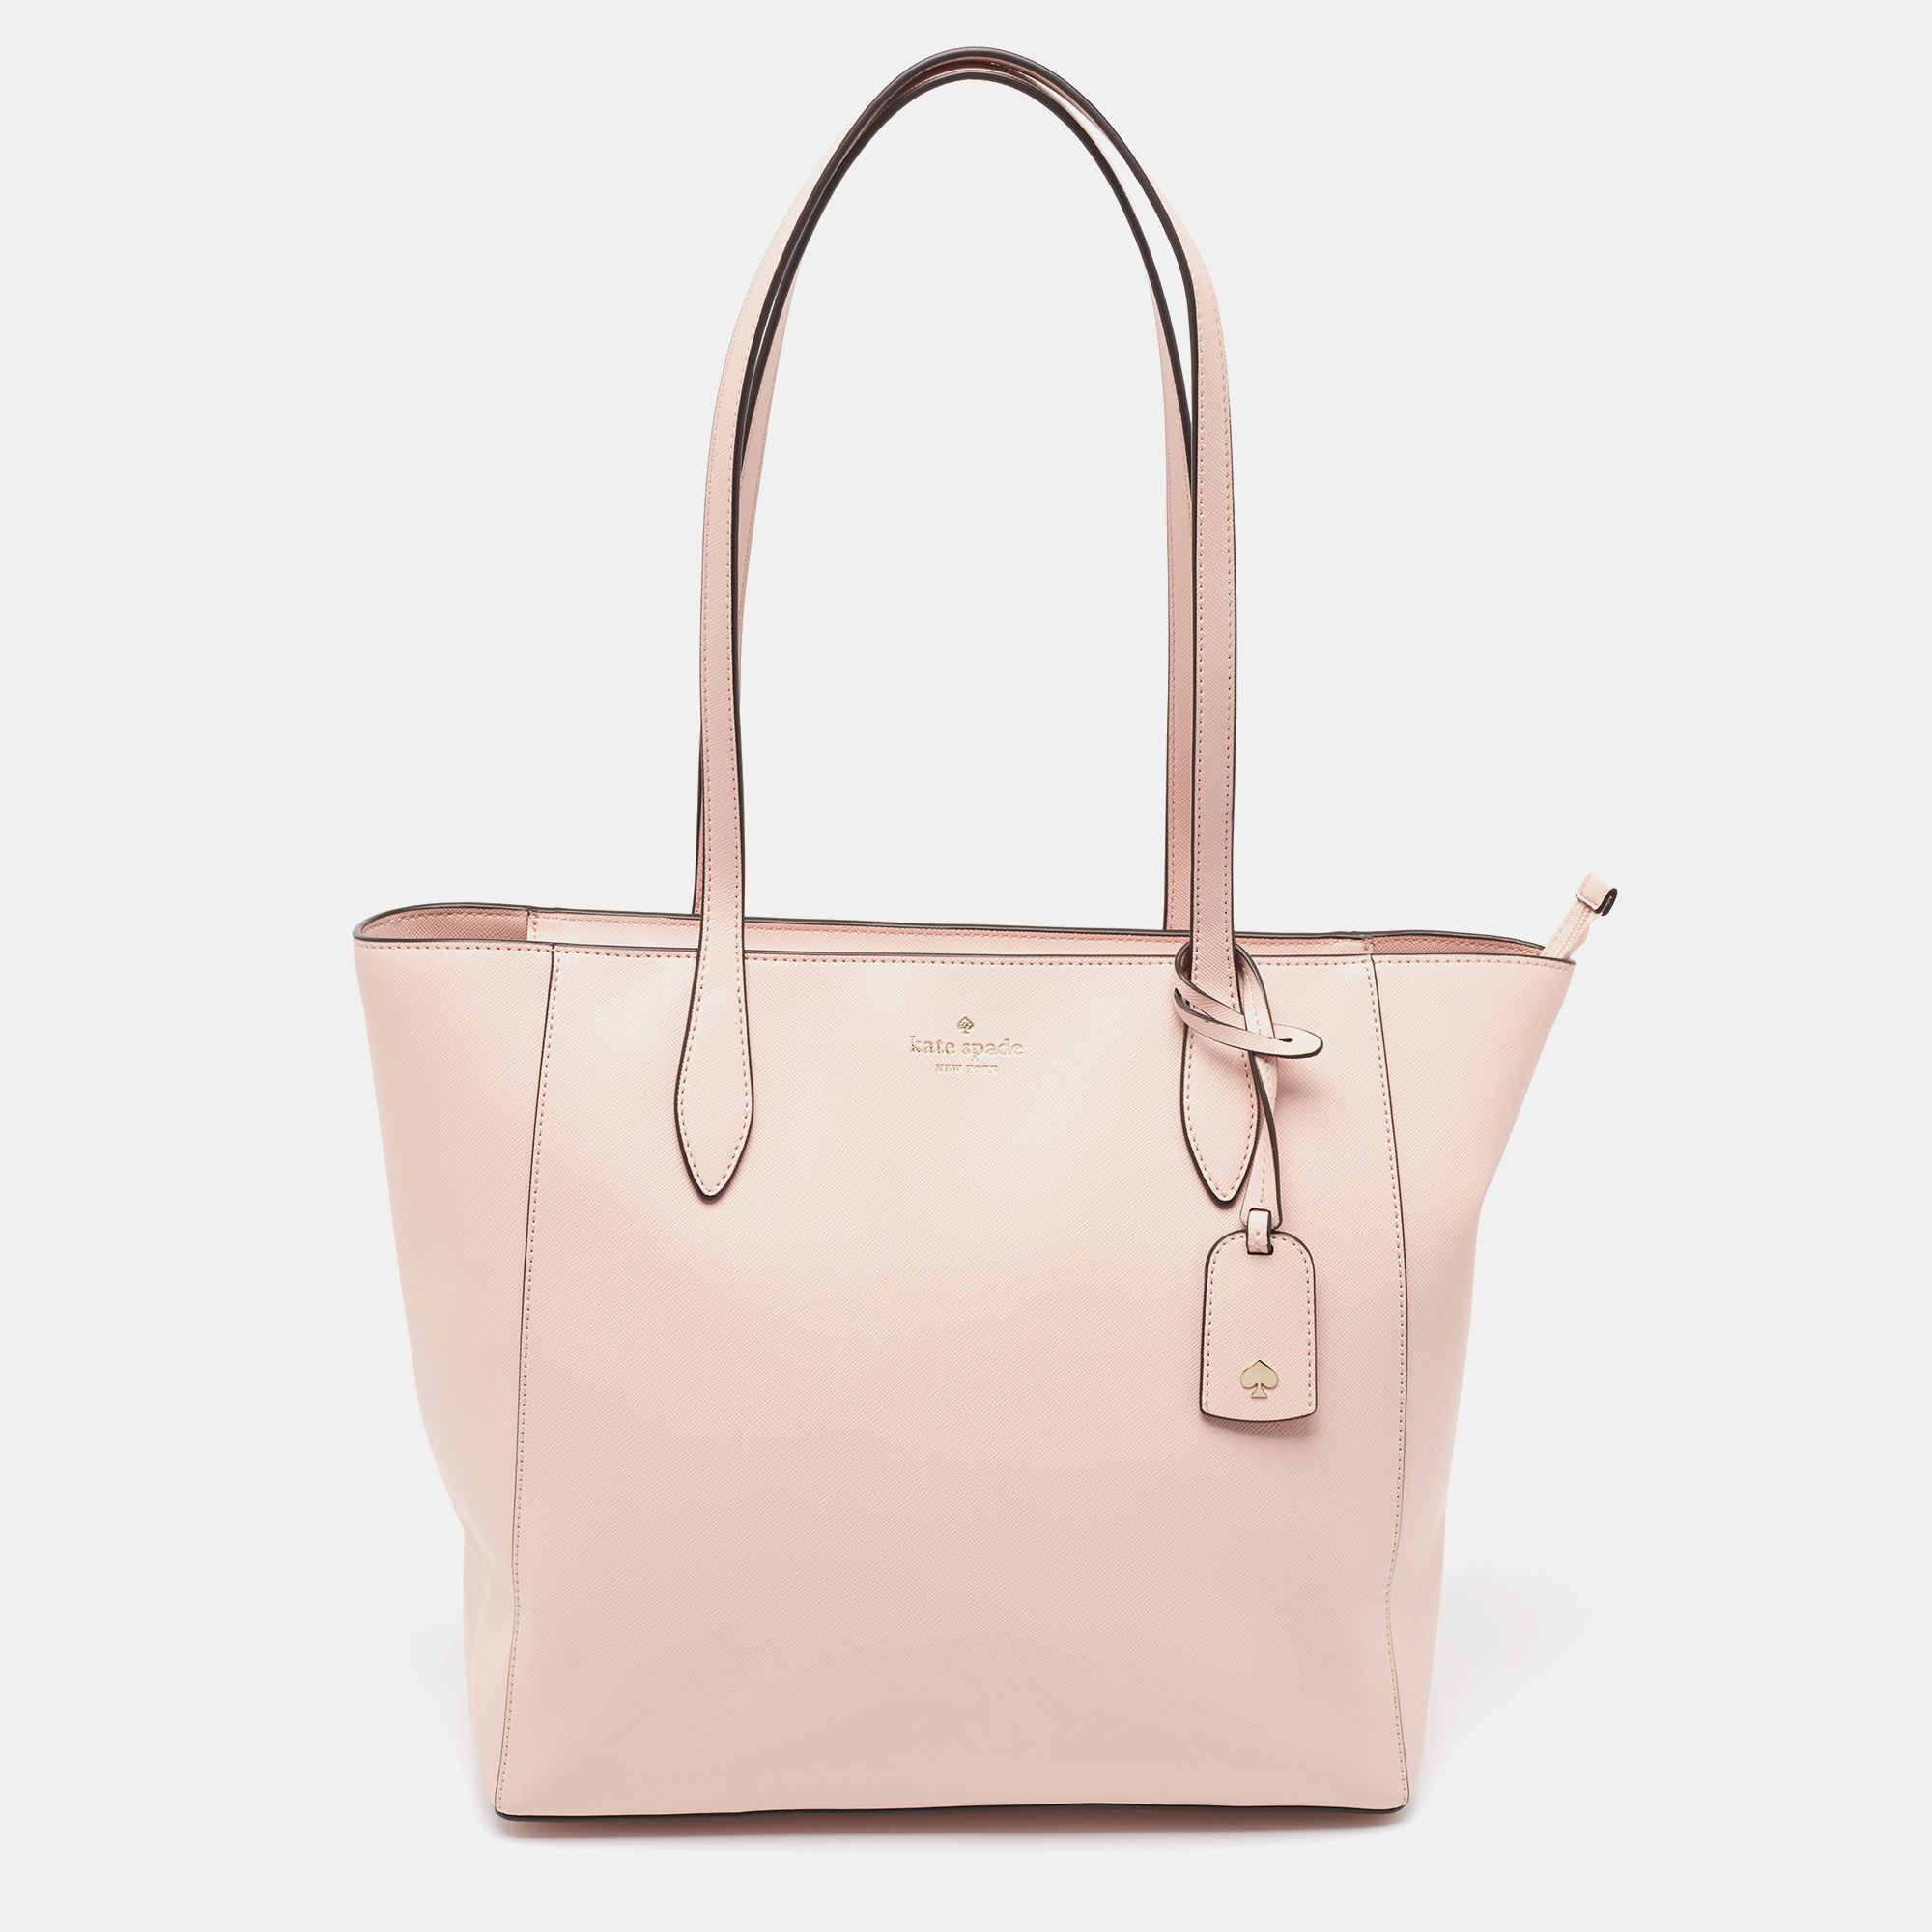 Pre-owned Kate Spade Light Pink Leather Large Dana Tote